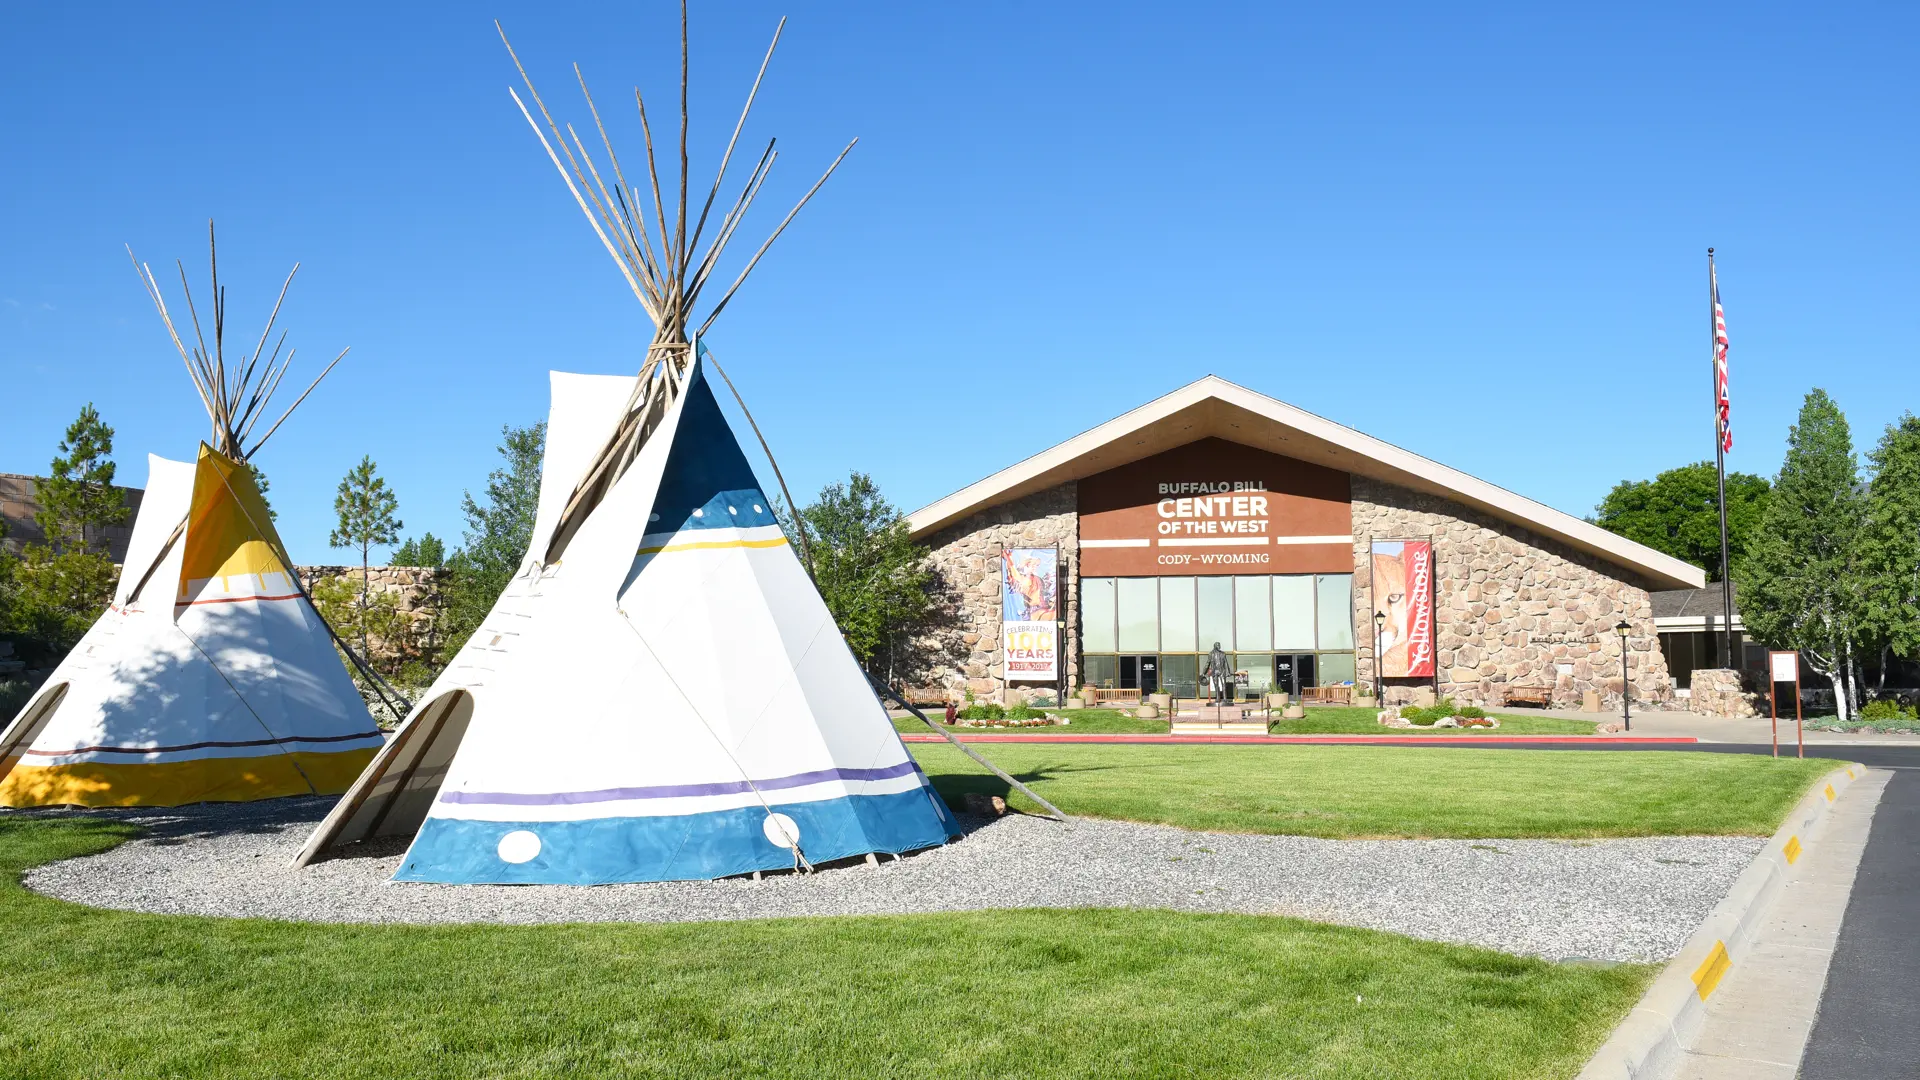 Shutterstock 669836206 Tepees At Buffalo Bill Center Of The West